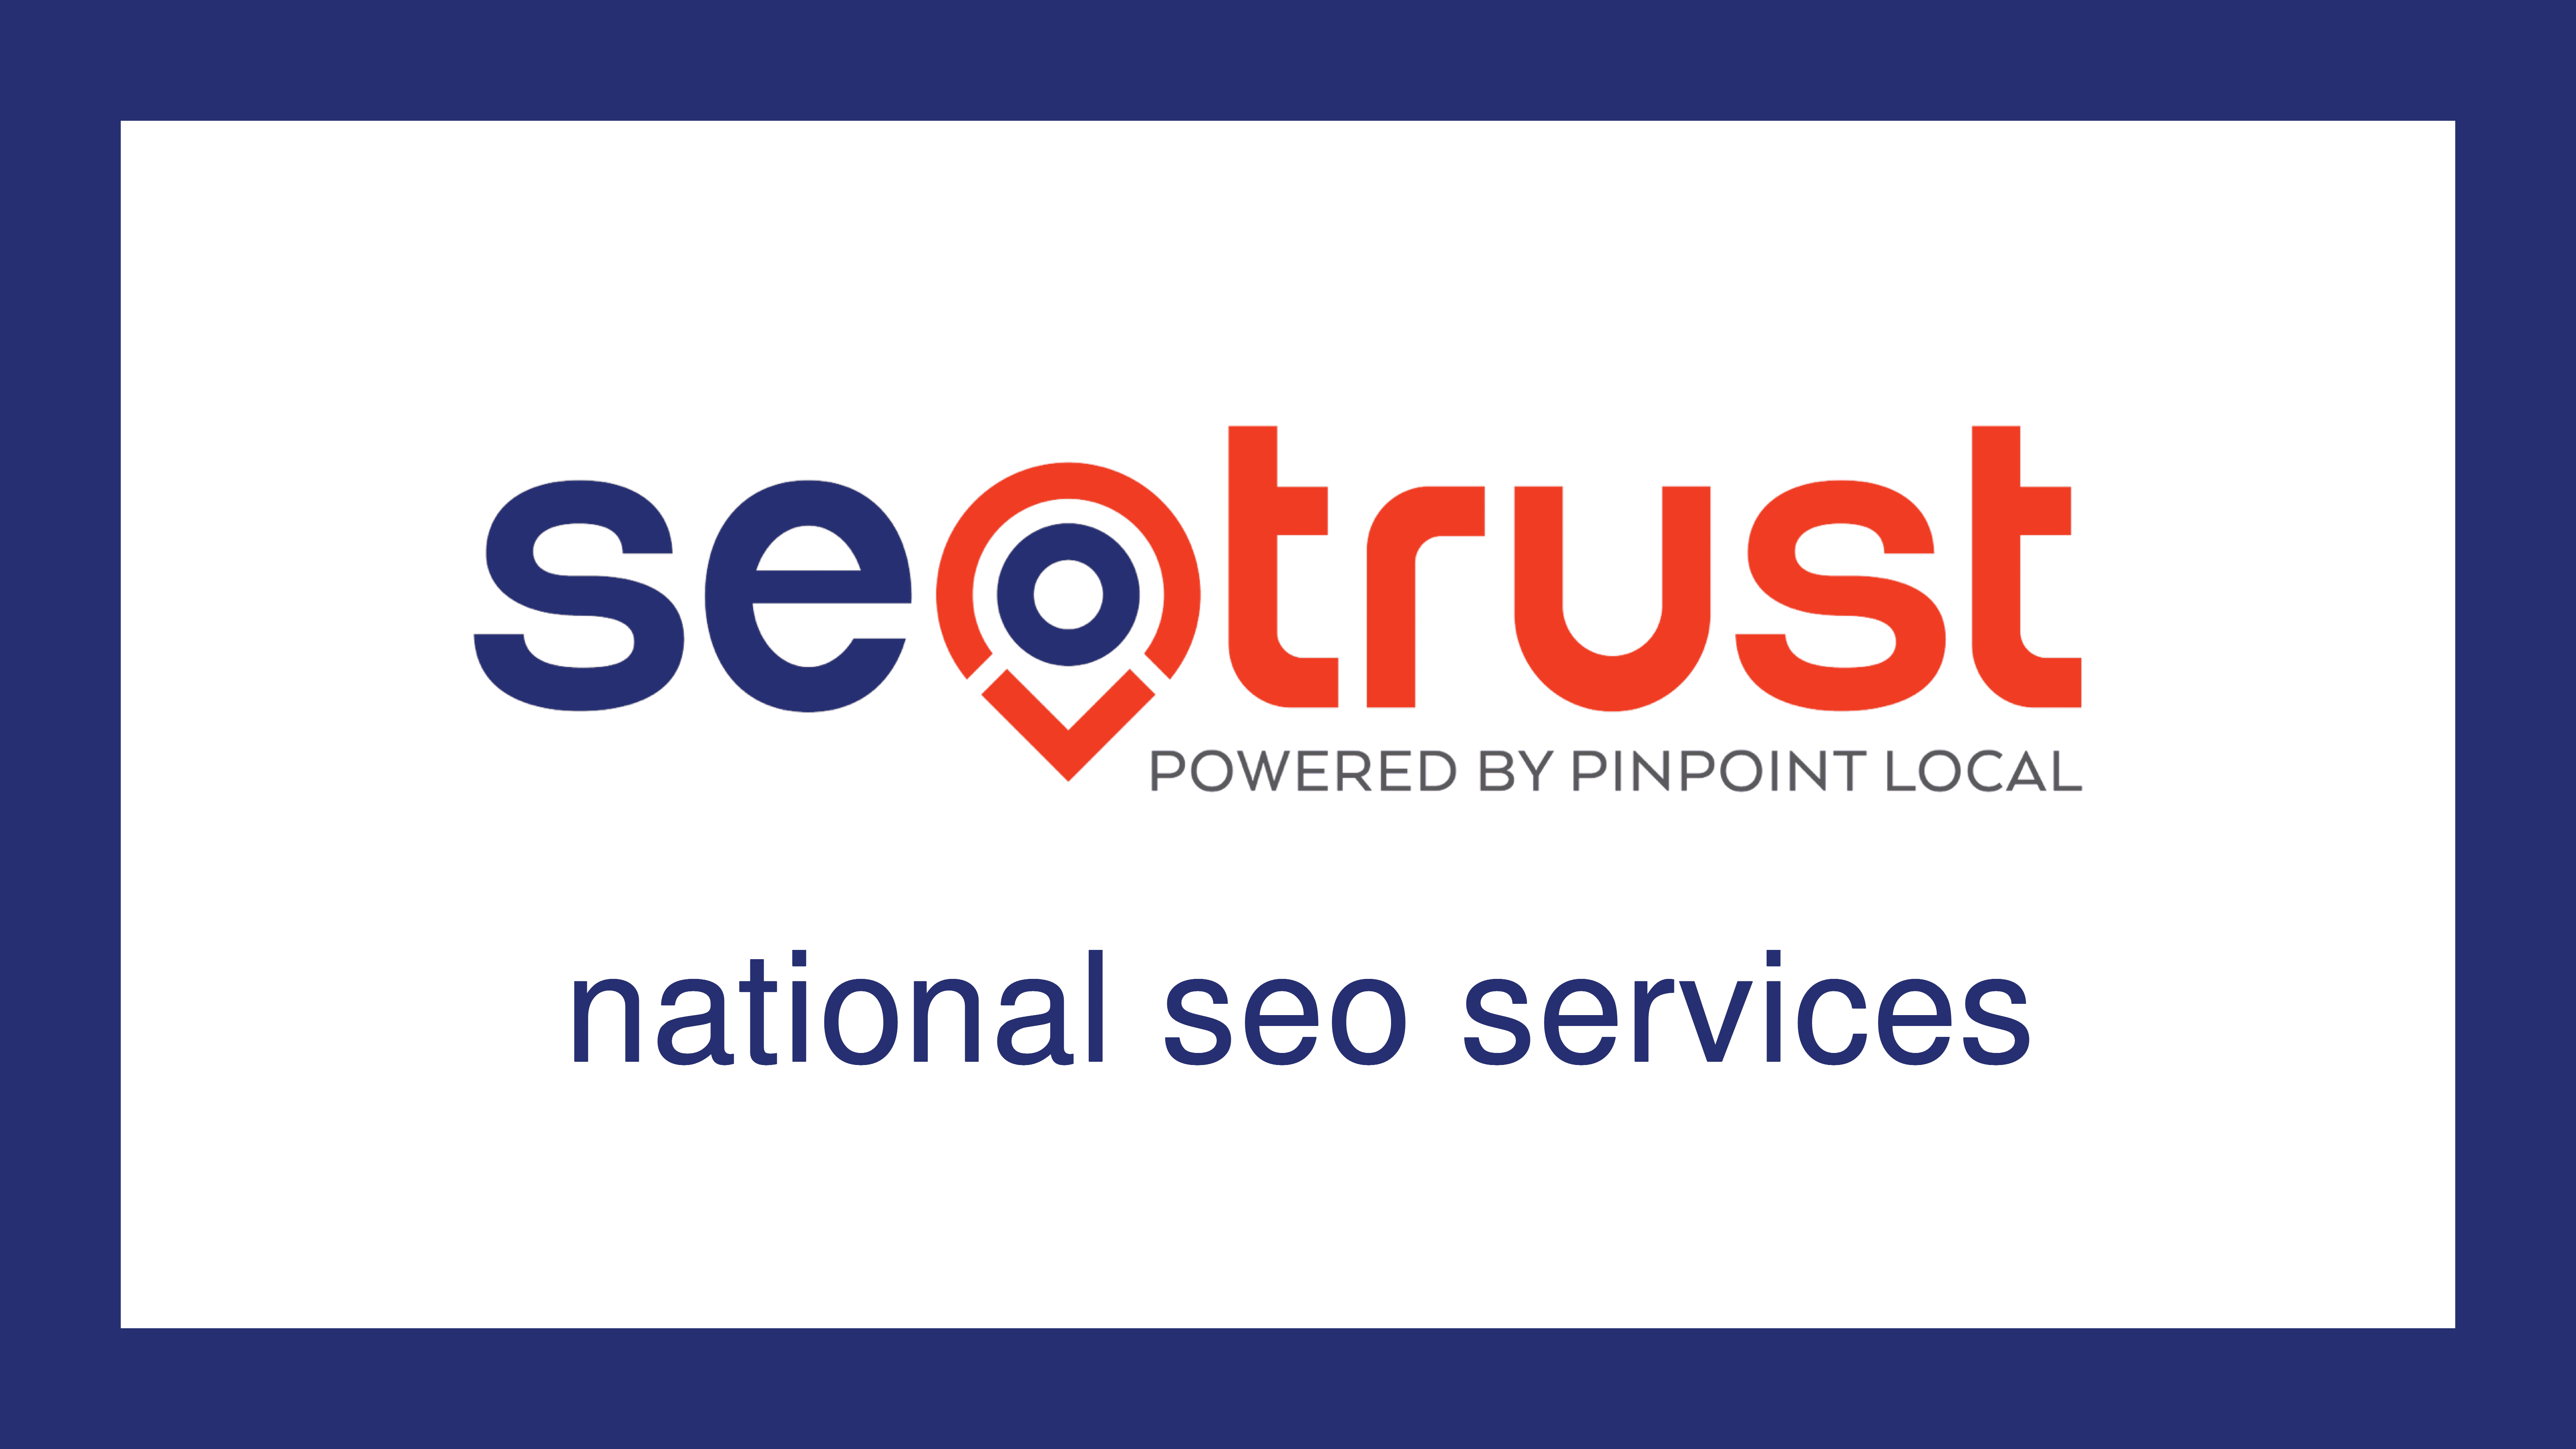 Seeking Setrust national SEO services from the best SEO company near me.